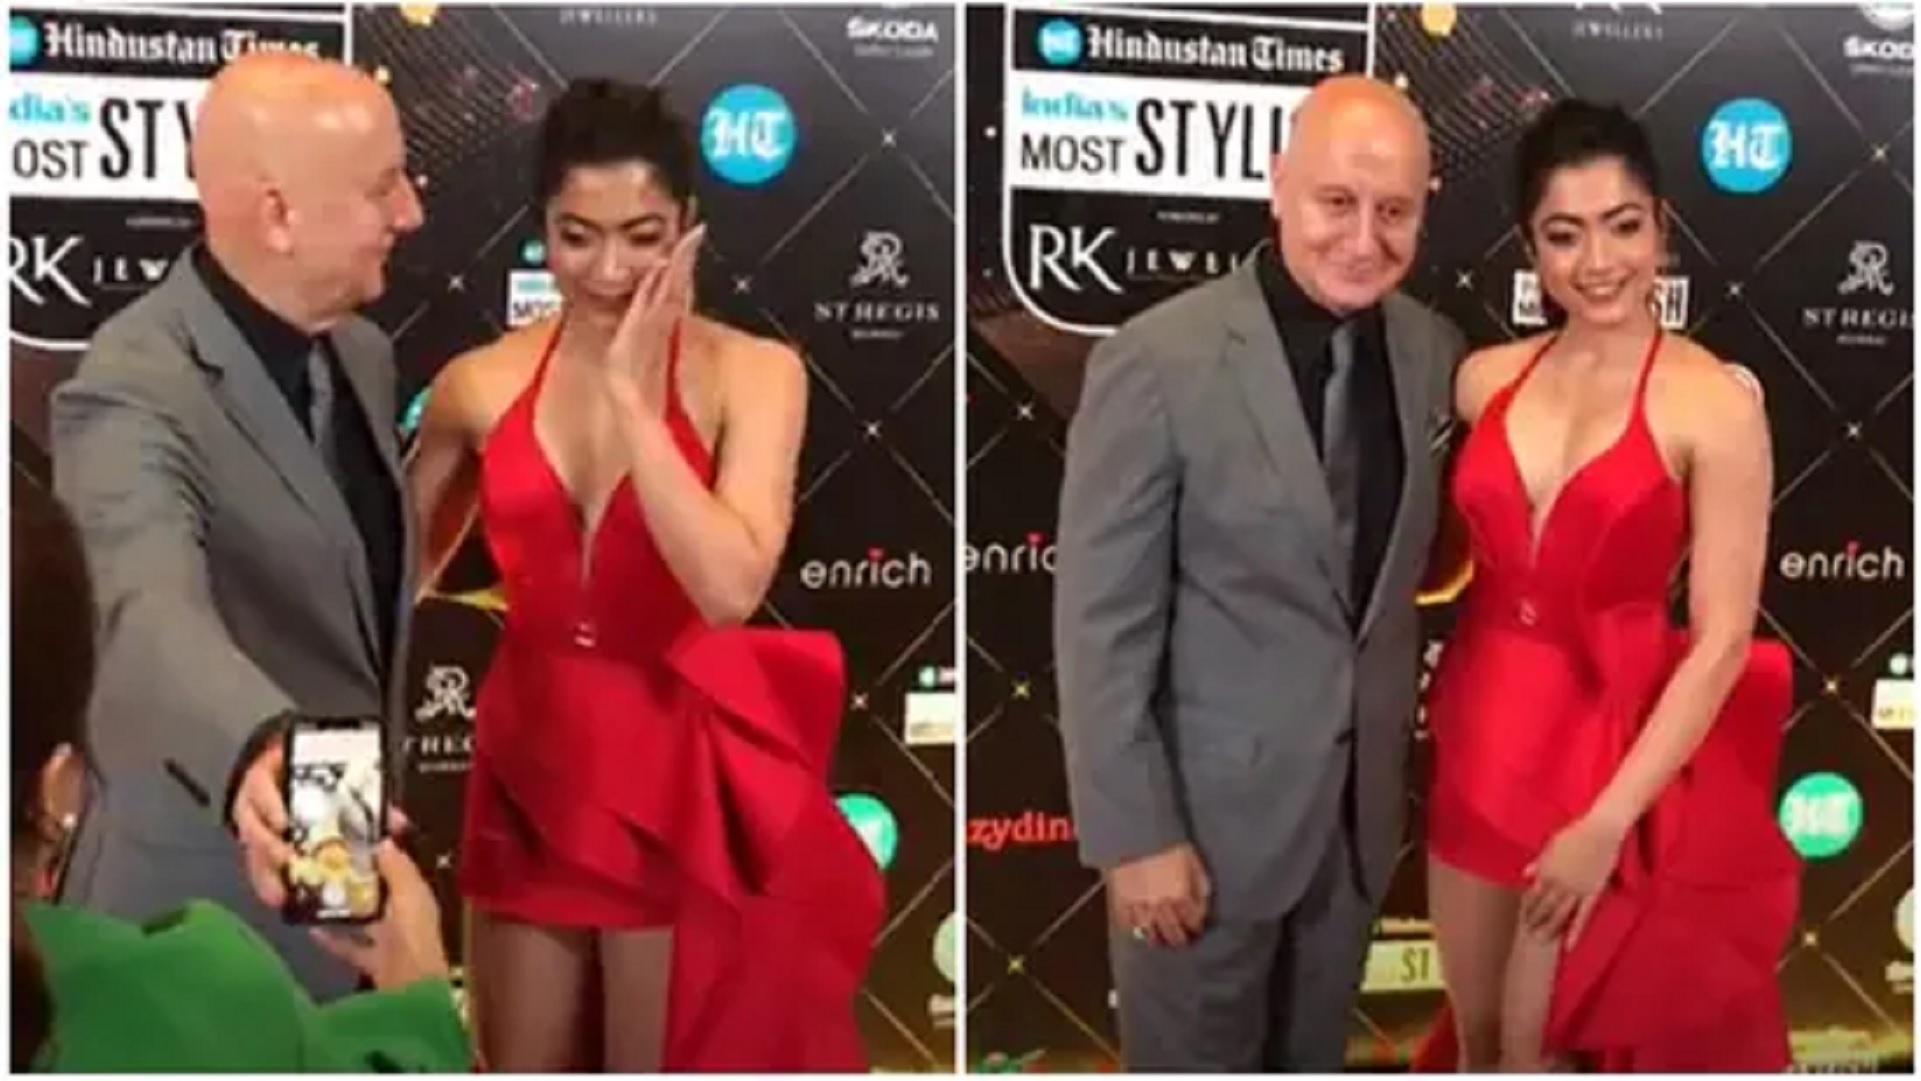 Anupam Kher asks Rashmika Mandhana for a picture together on his phone, leaves the actress blushing